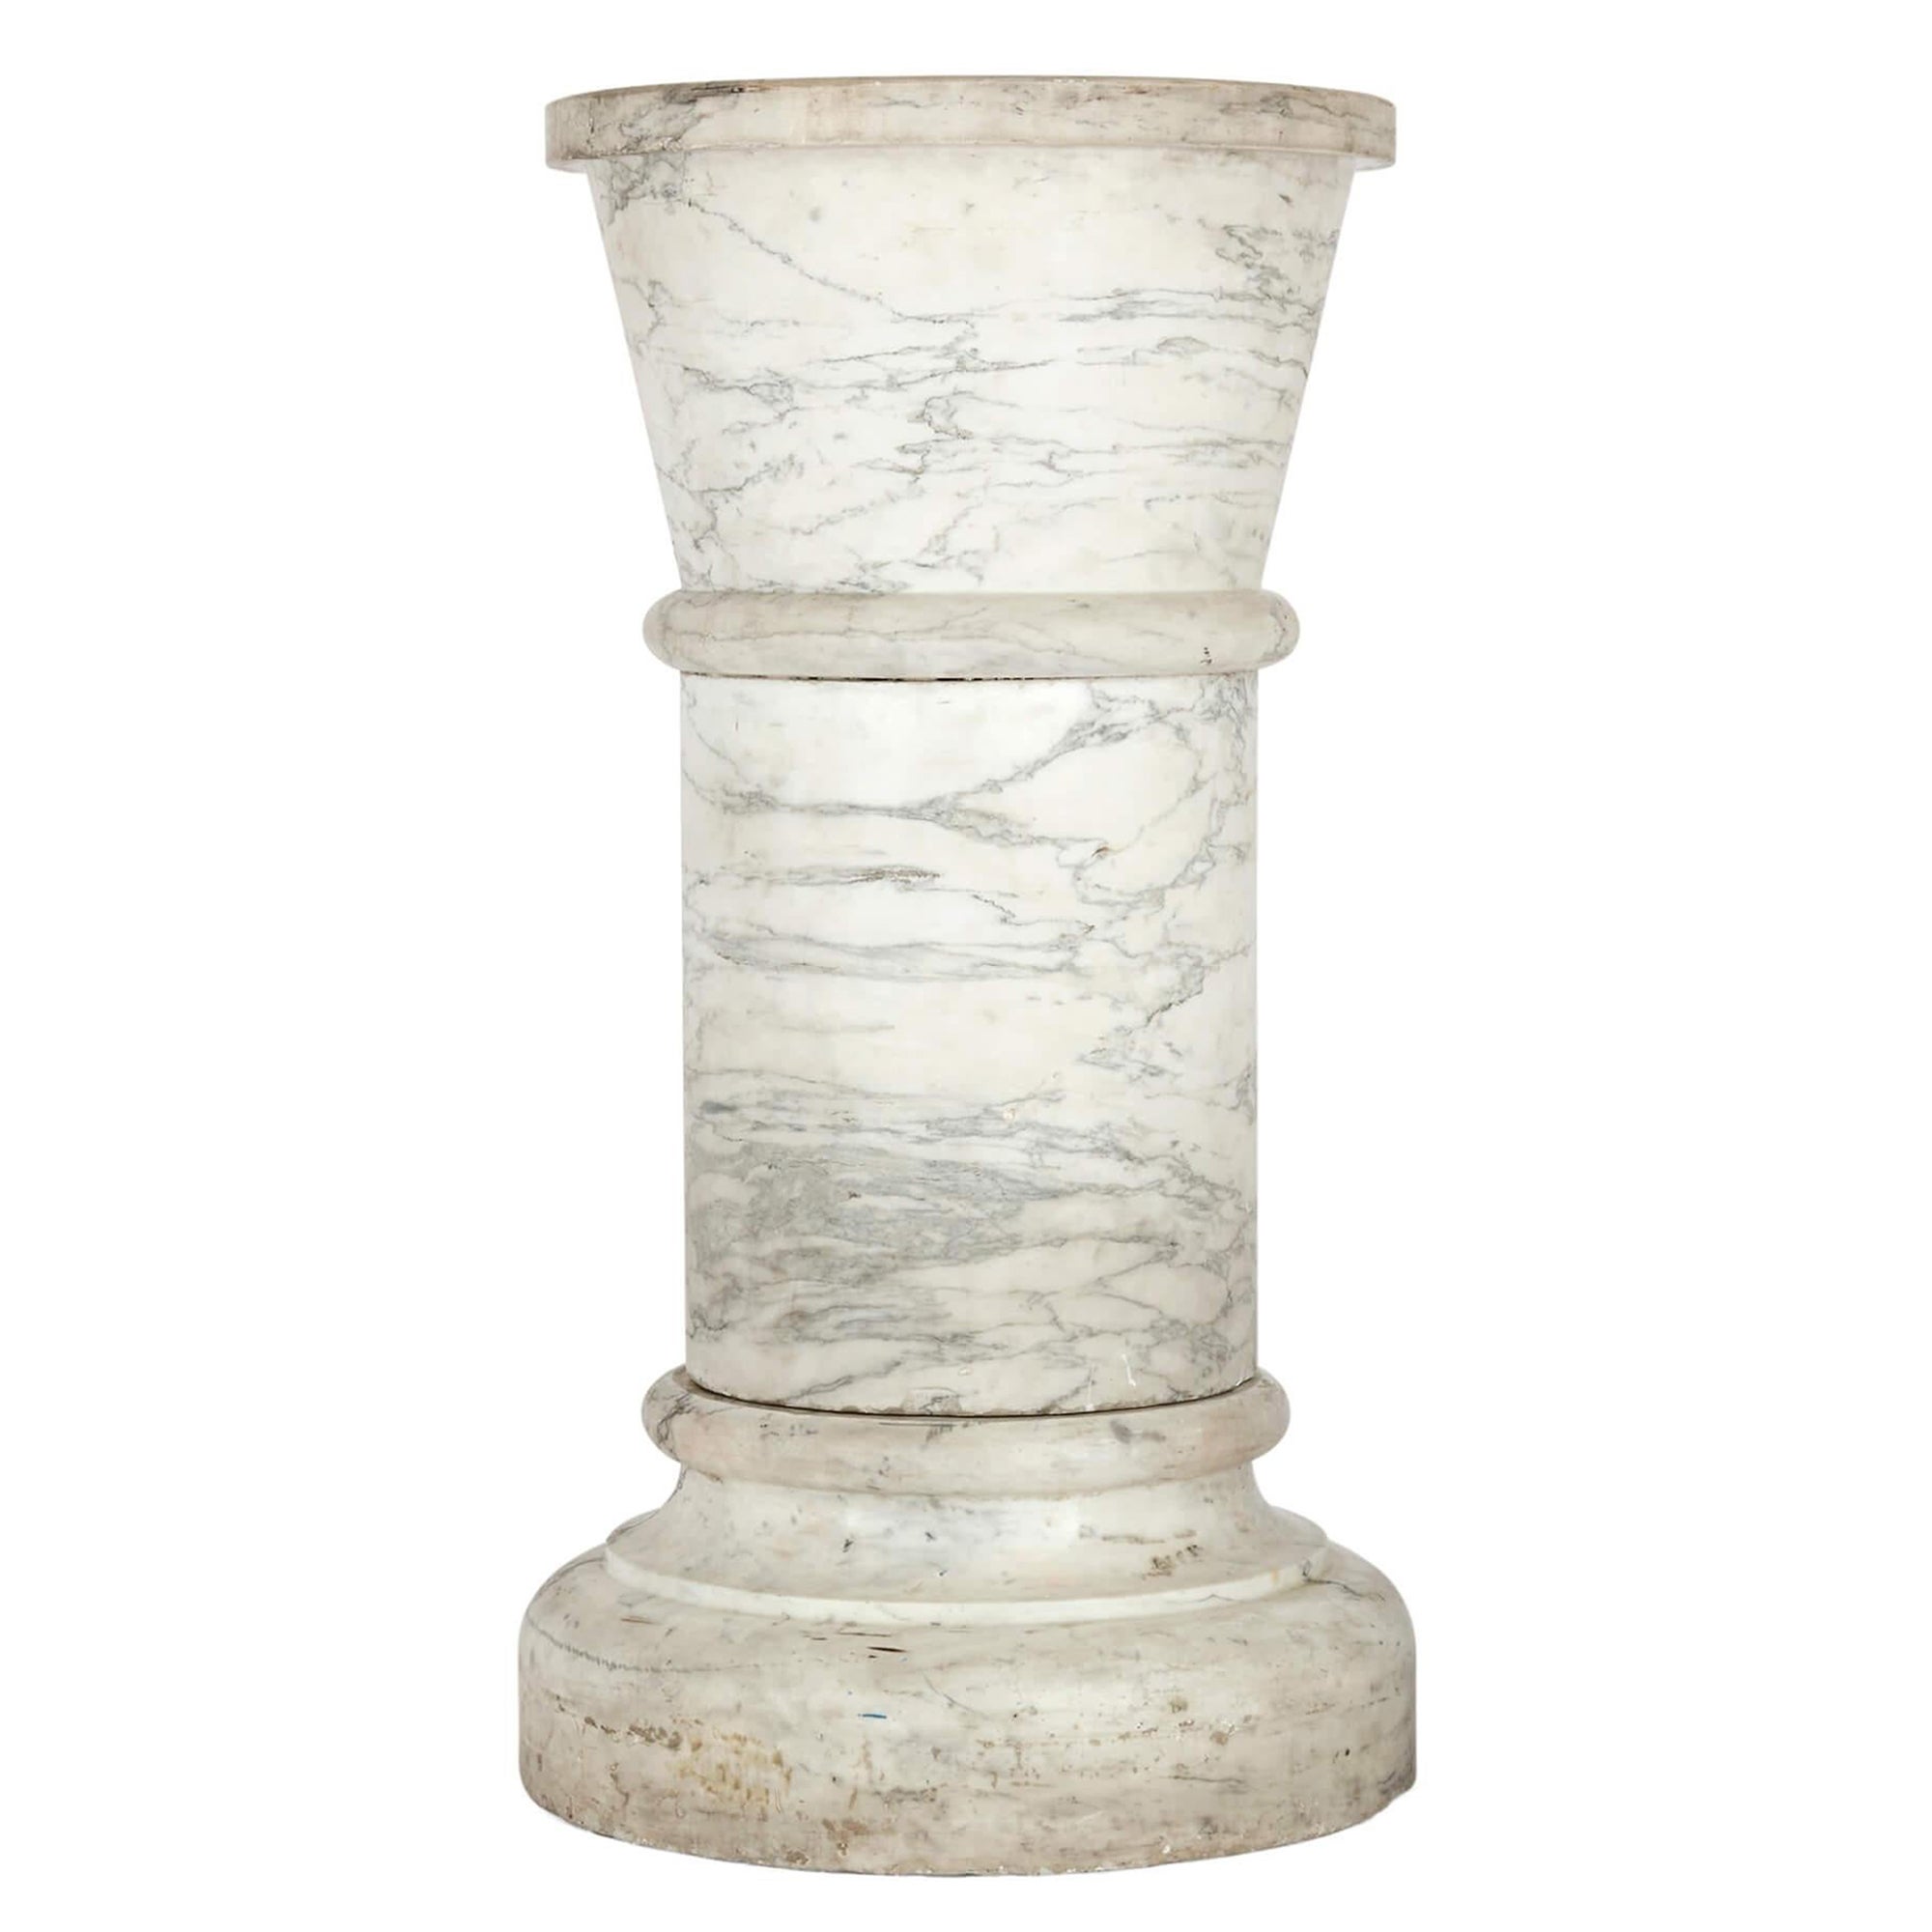 Large 19th Century Neoclassical Style White Marble Pedestal